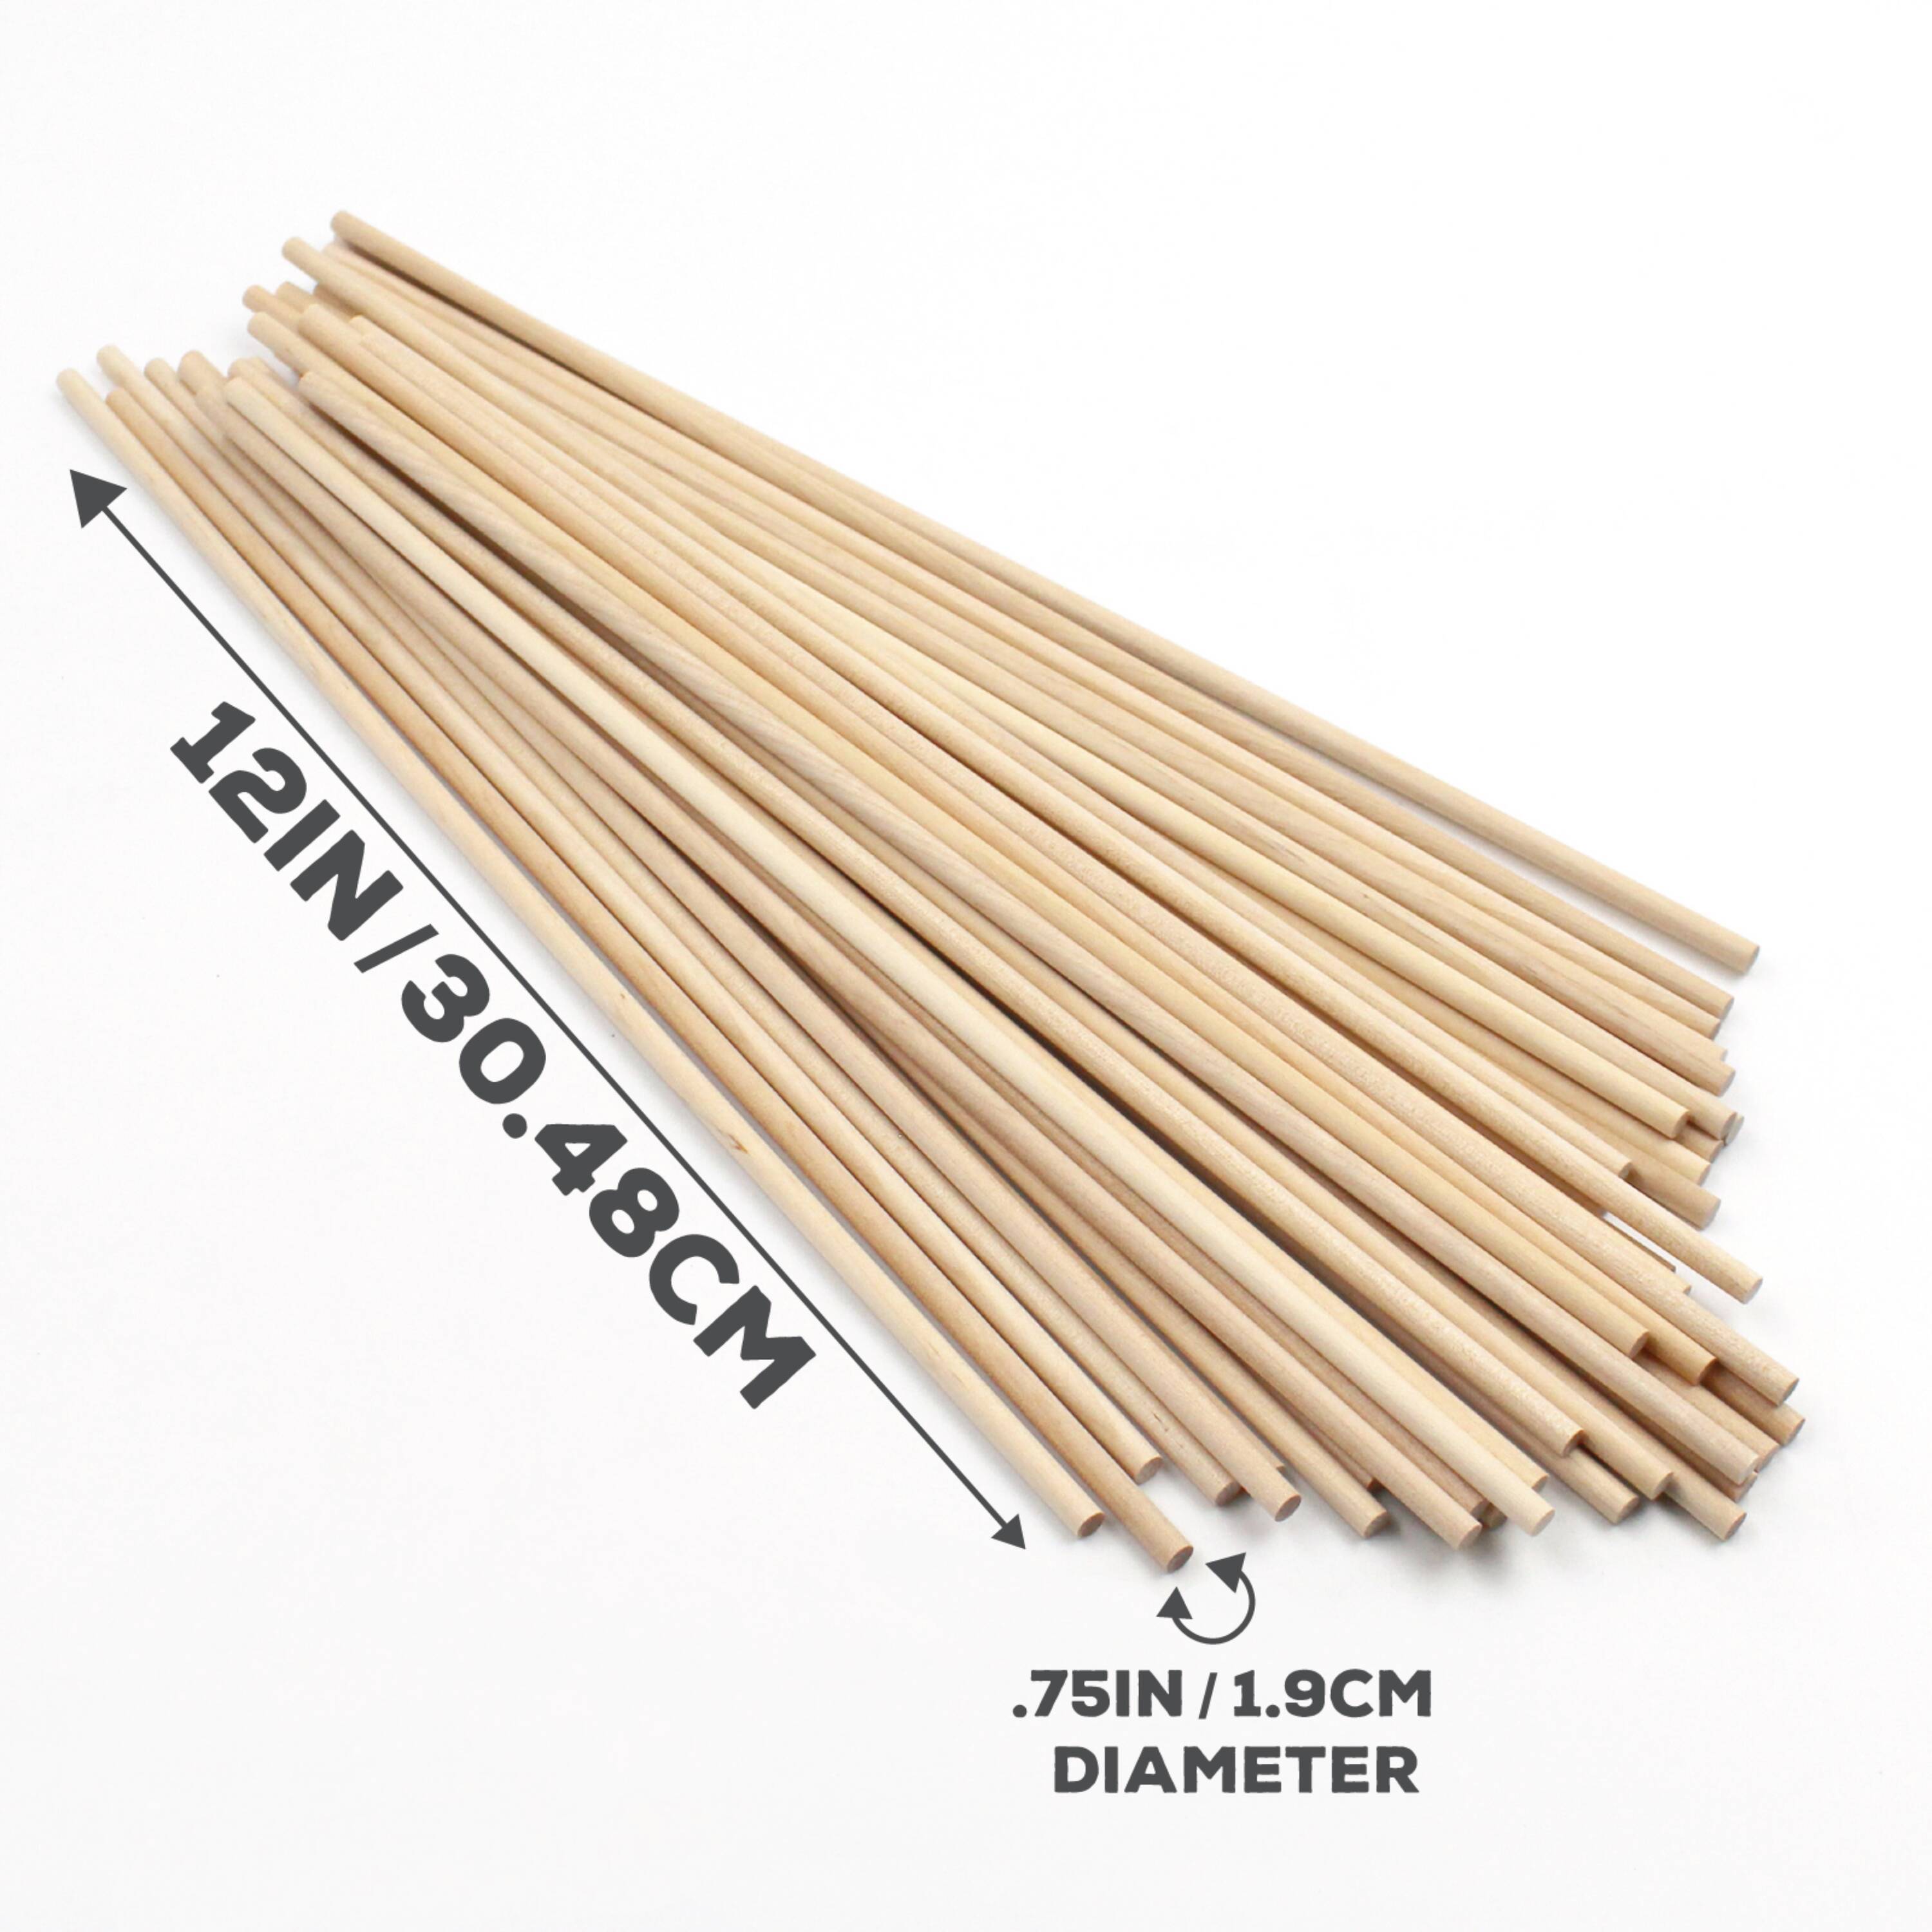 Unfinished Birch Dowel Rods for Crafts – 10-Pack, 1/2 x 12 in. Kiln-Dried  Wooden Dowel Rod Craft Sticks in Bulk – Durable Wood Sticks That Resist